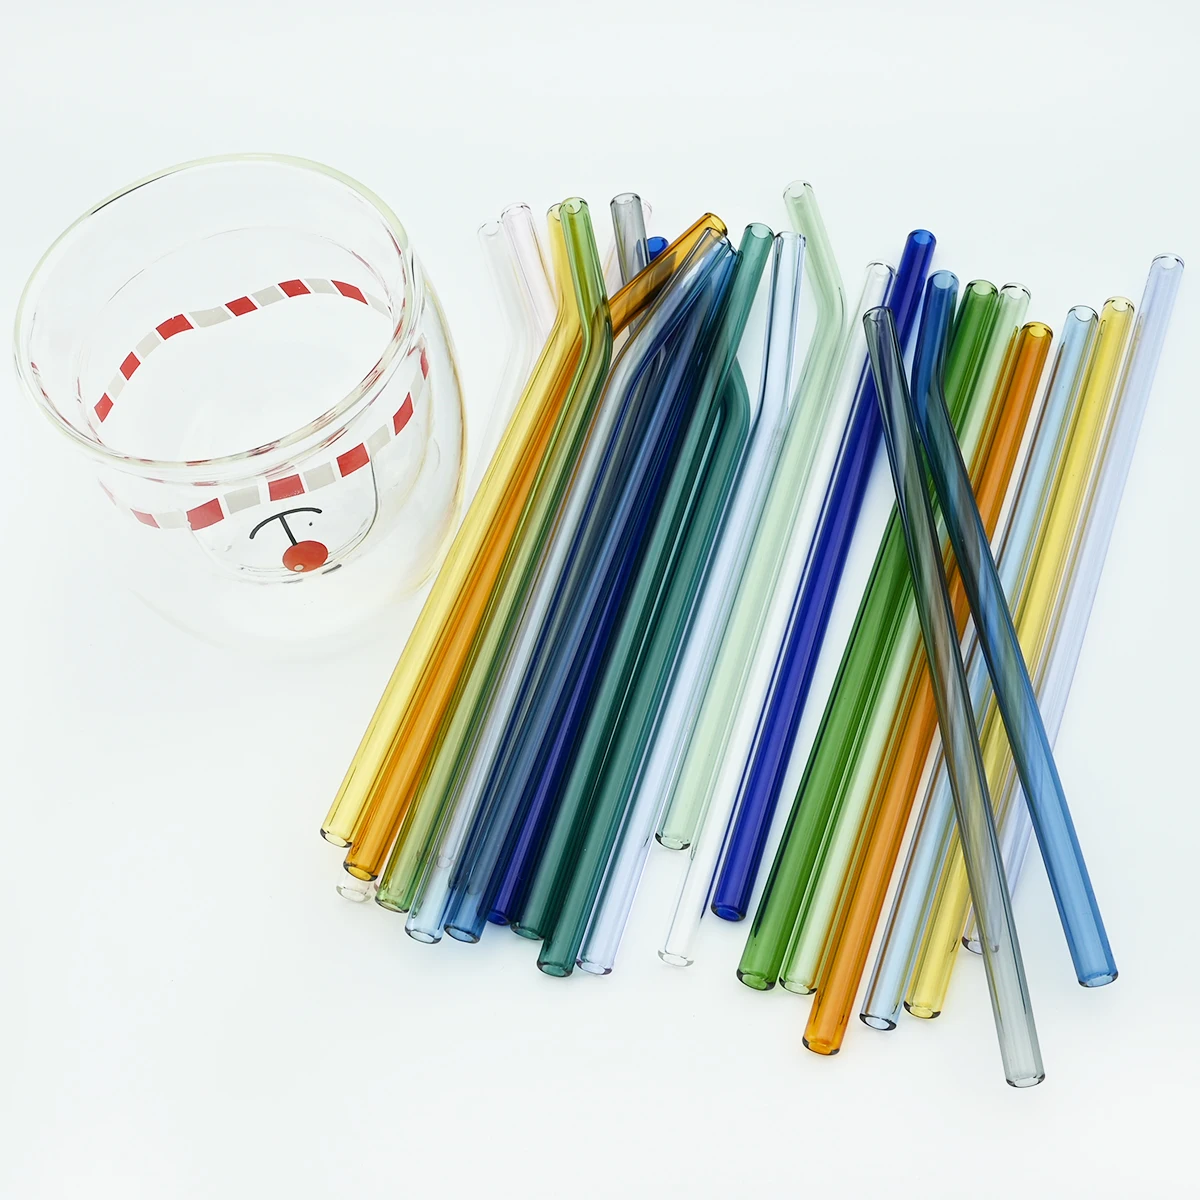 https://ae01.alicdn.com/kf/H38f2e6eb7941461ab1228db46845dd5fX/Reusable-Drinking-Straw-Set-High-Borosilicate-Glass-Straw-Eco-Friendly-for-Smoothies-Cocktails-Bar-Accessories-Straw.jpg